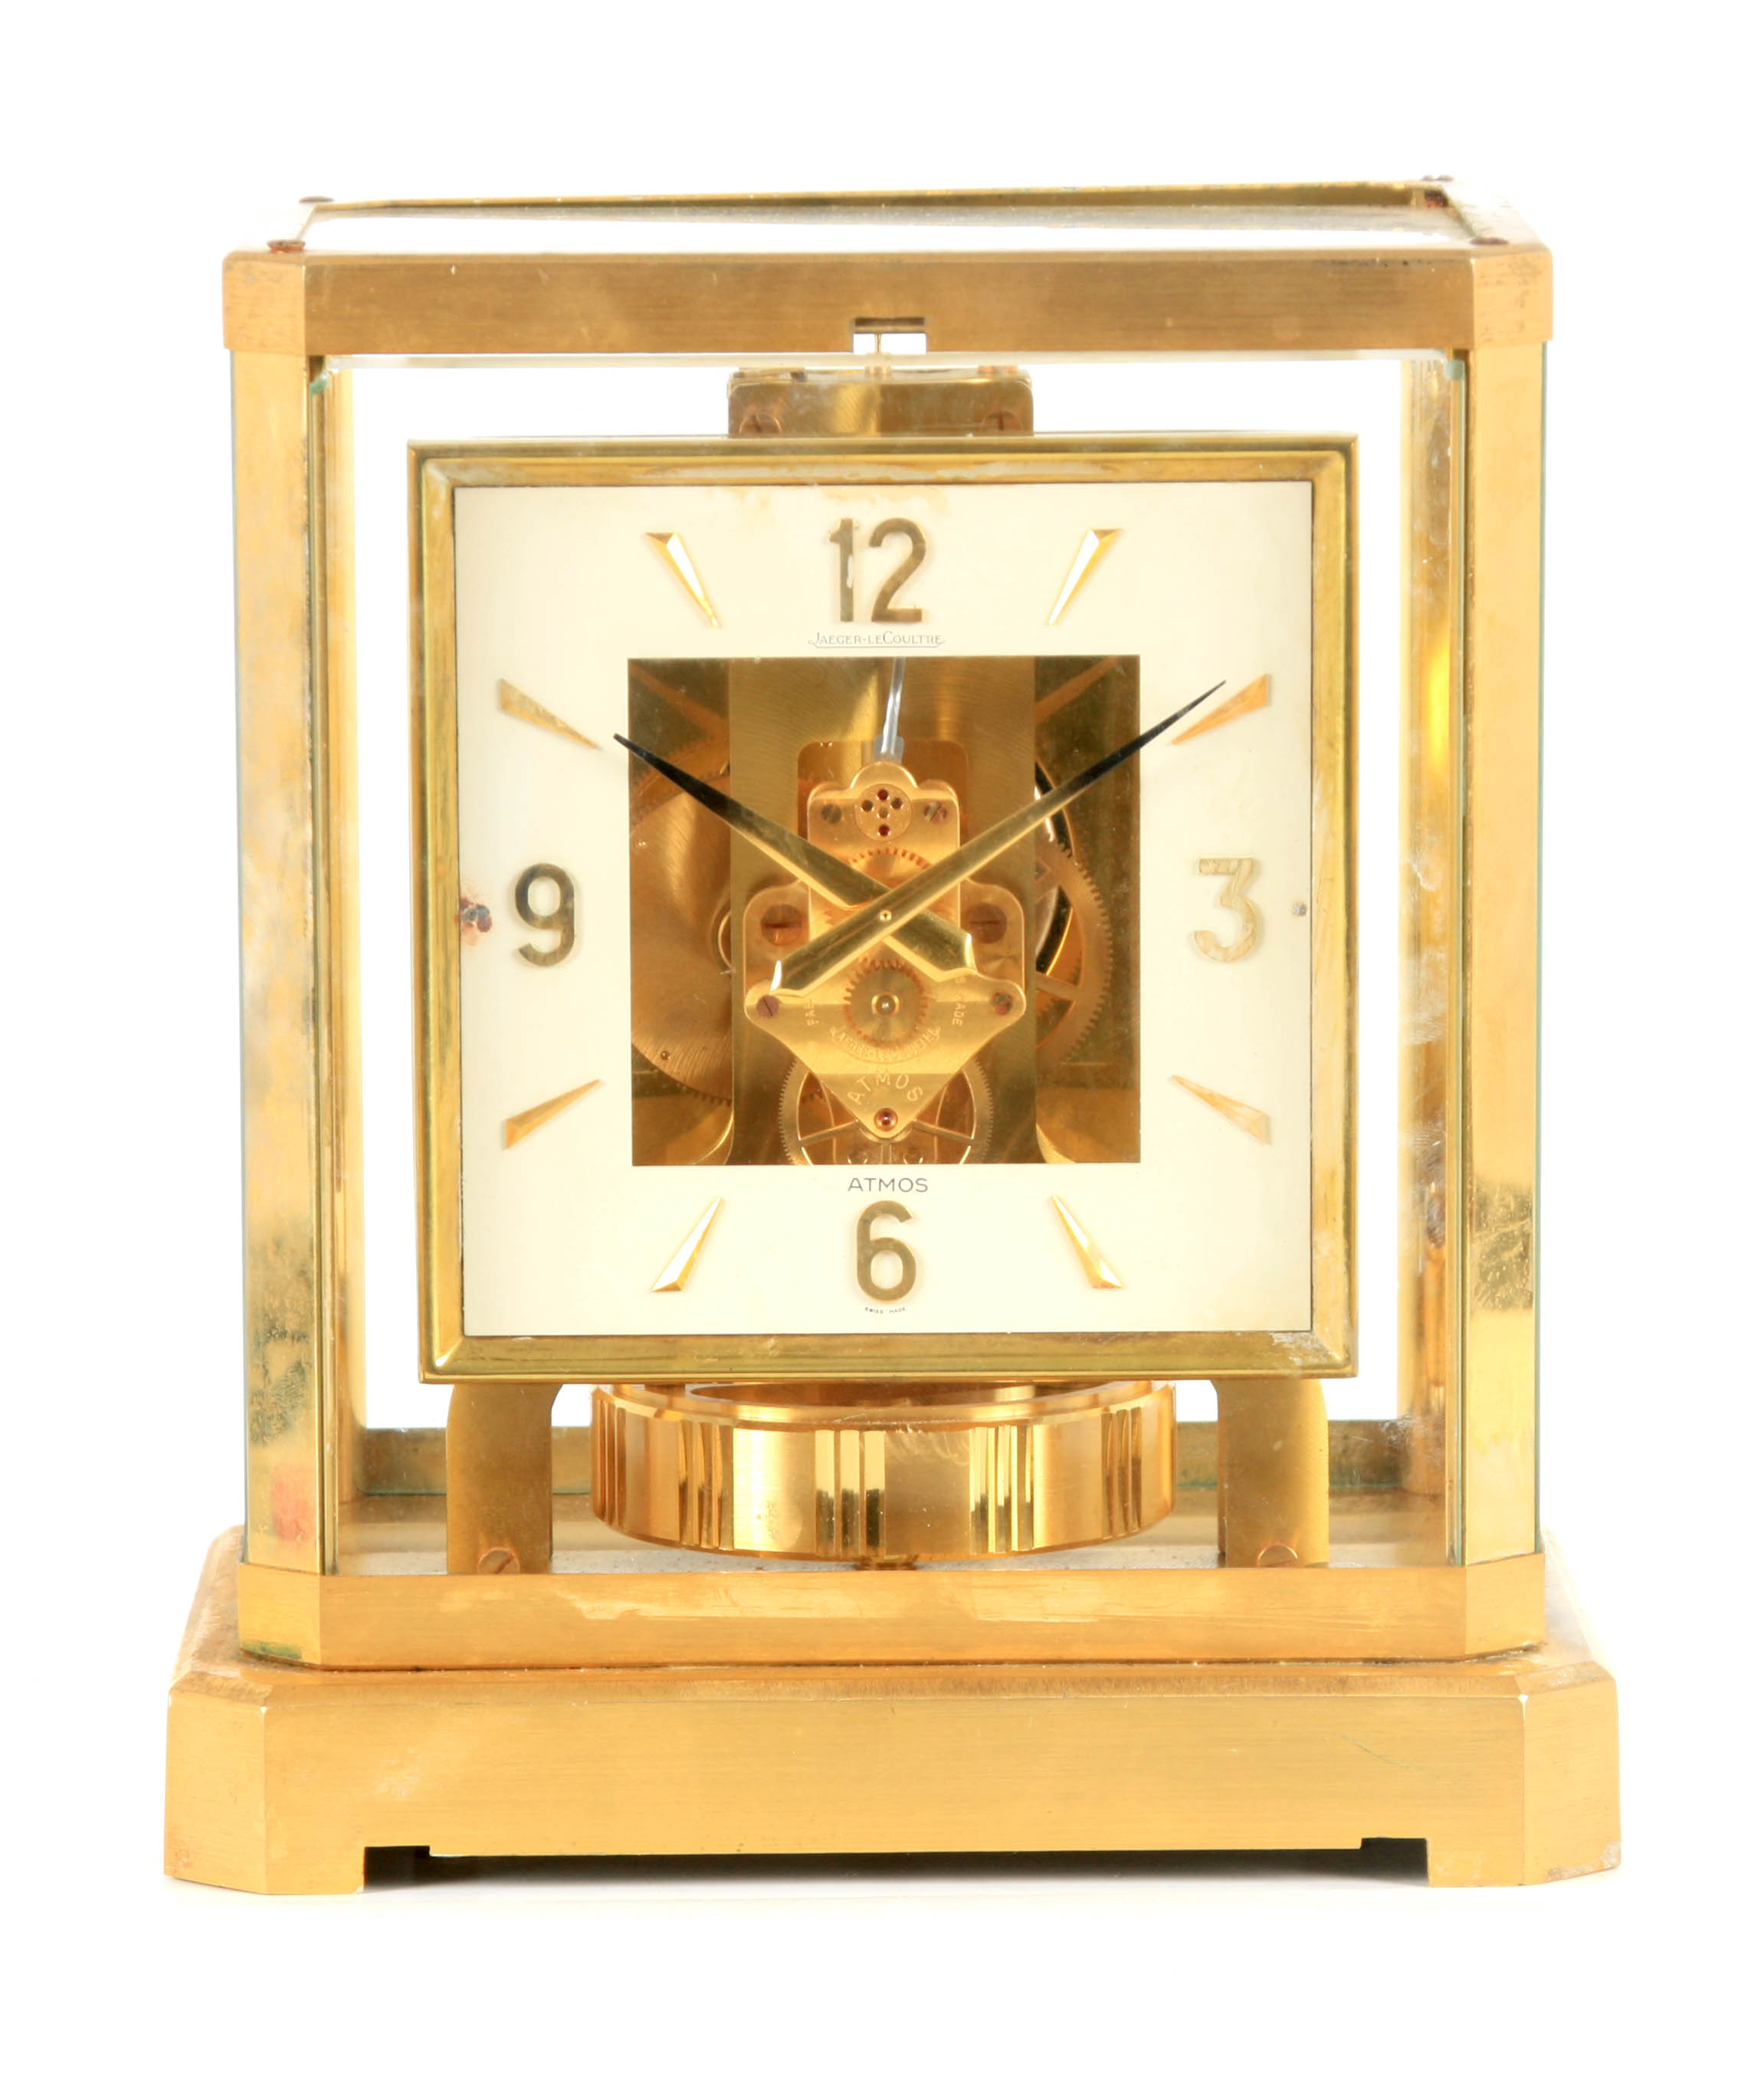 A JAEGER-LECOULTRE ATMOS CLOCK the gilt brass framed case with removable front glass panel enclosing